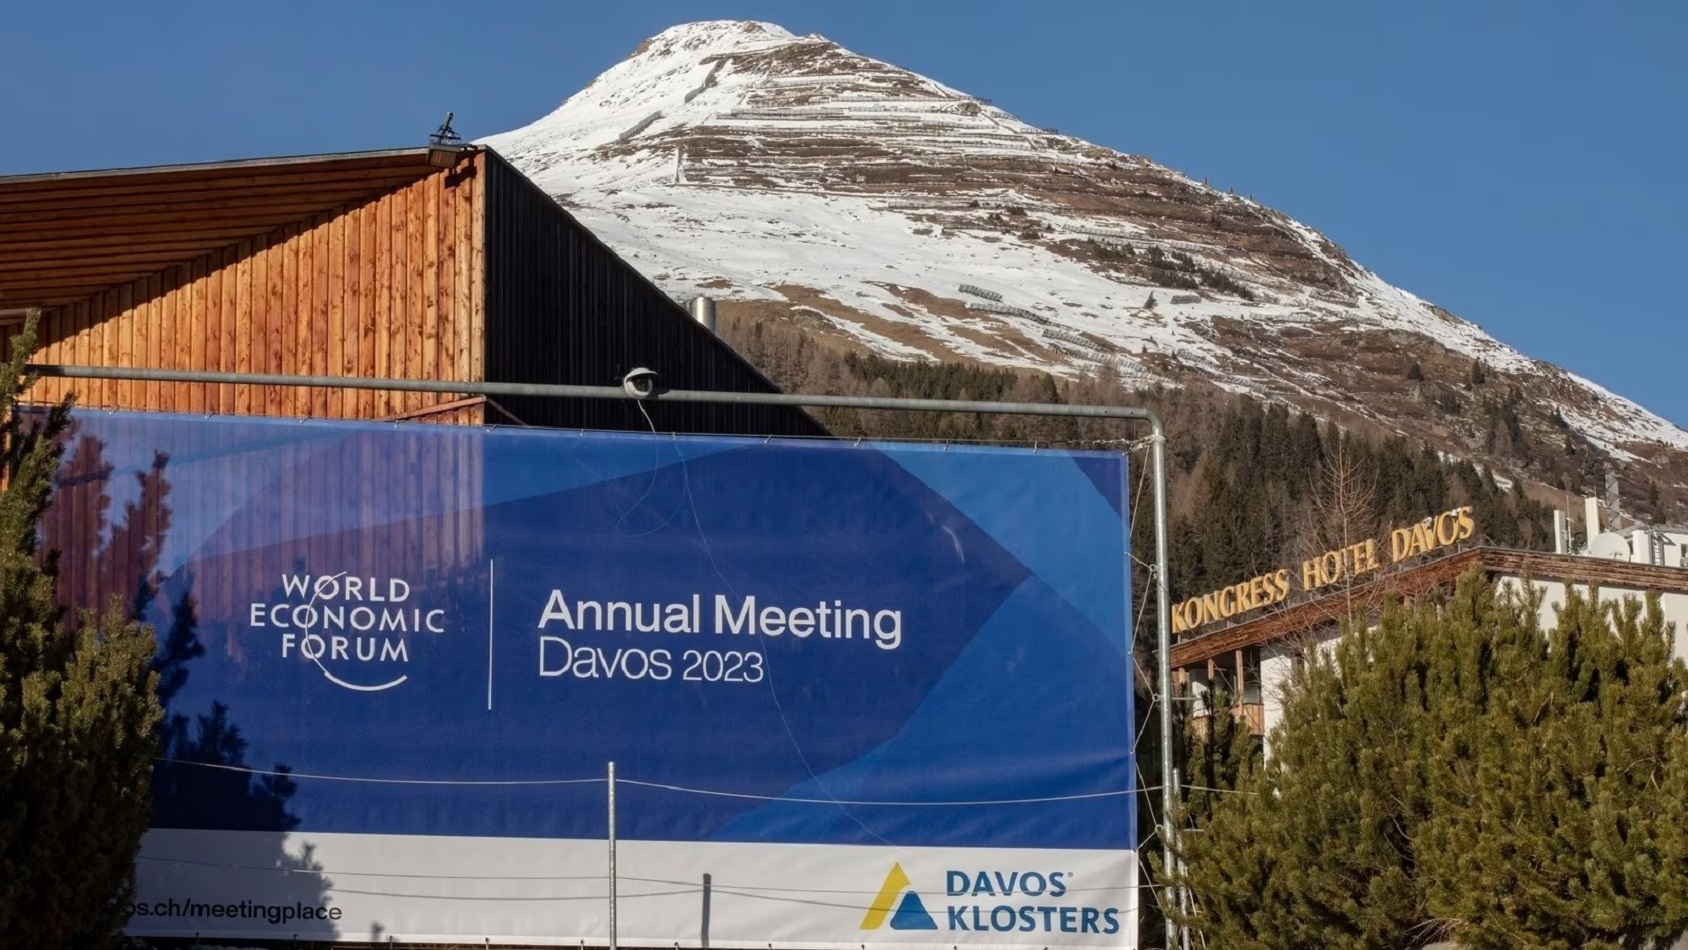 “A New System” – Inside the Davos Summit 2023